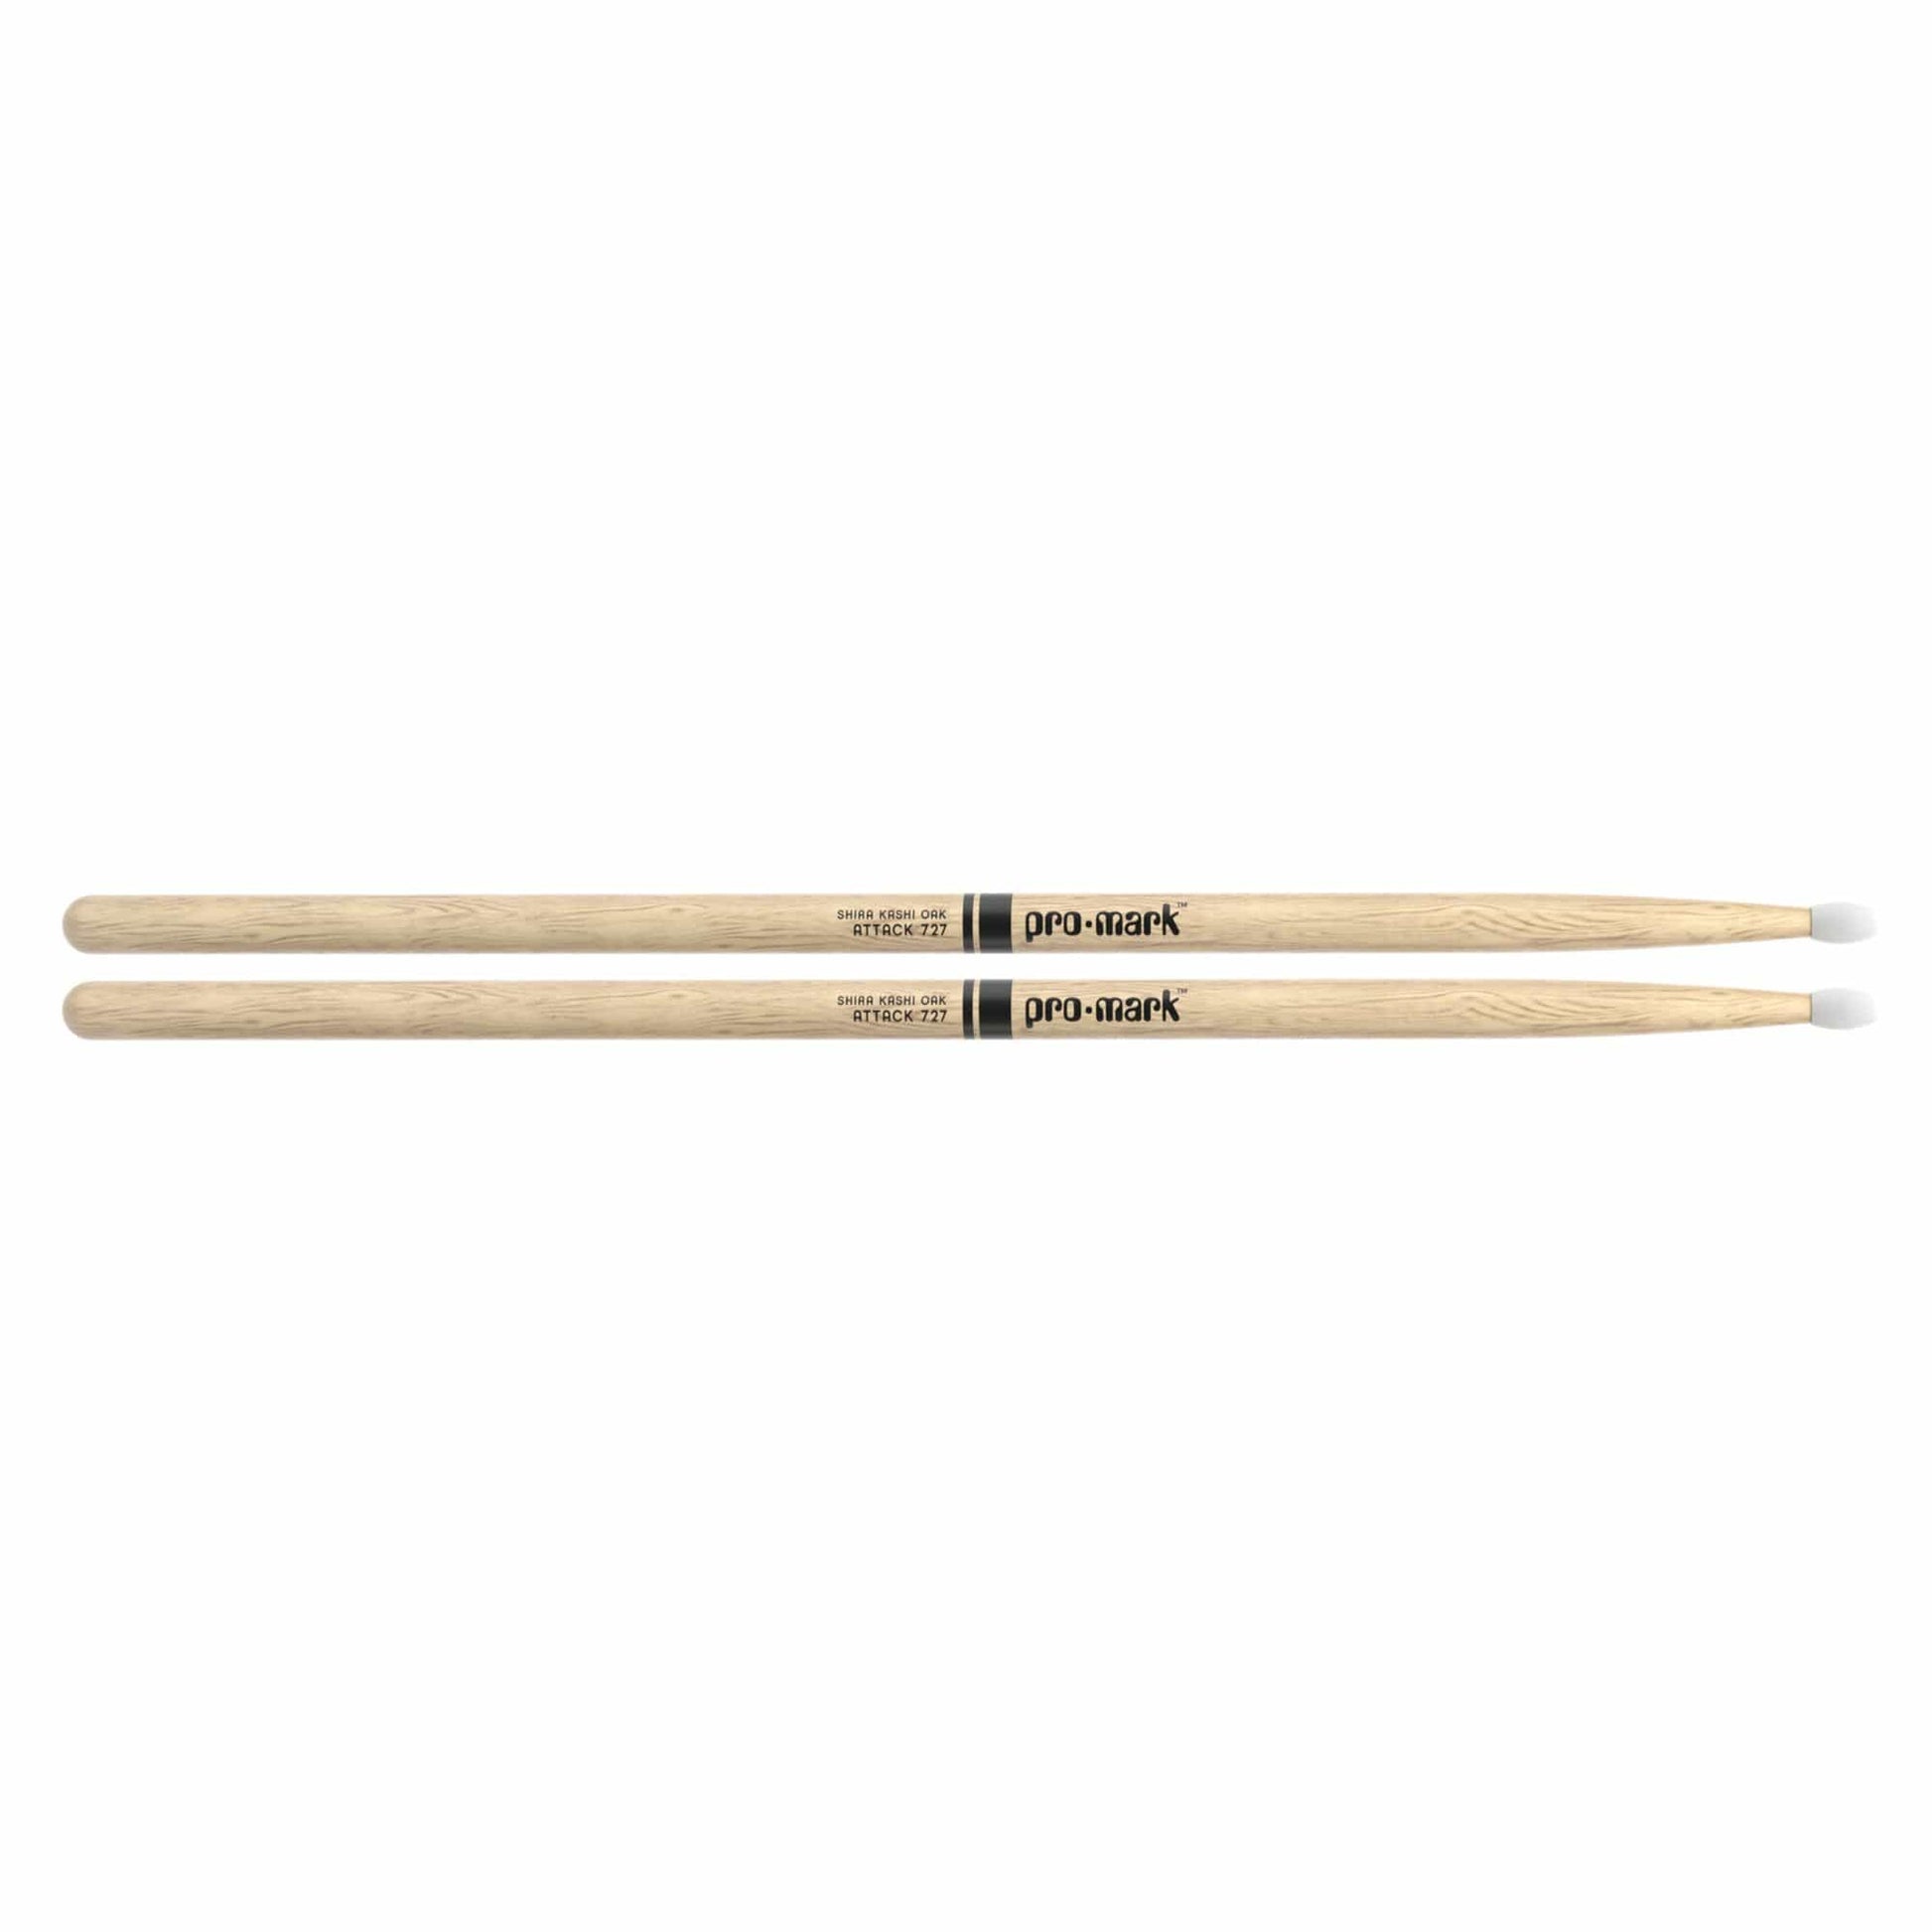 Promark Shira Kashi Oak 727 Wood Tip Drum Sticks Drums and Percussion / Parts and Accessories / Drum Sticks and Mallets